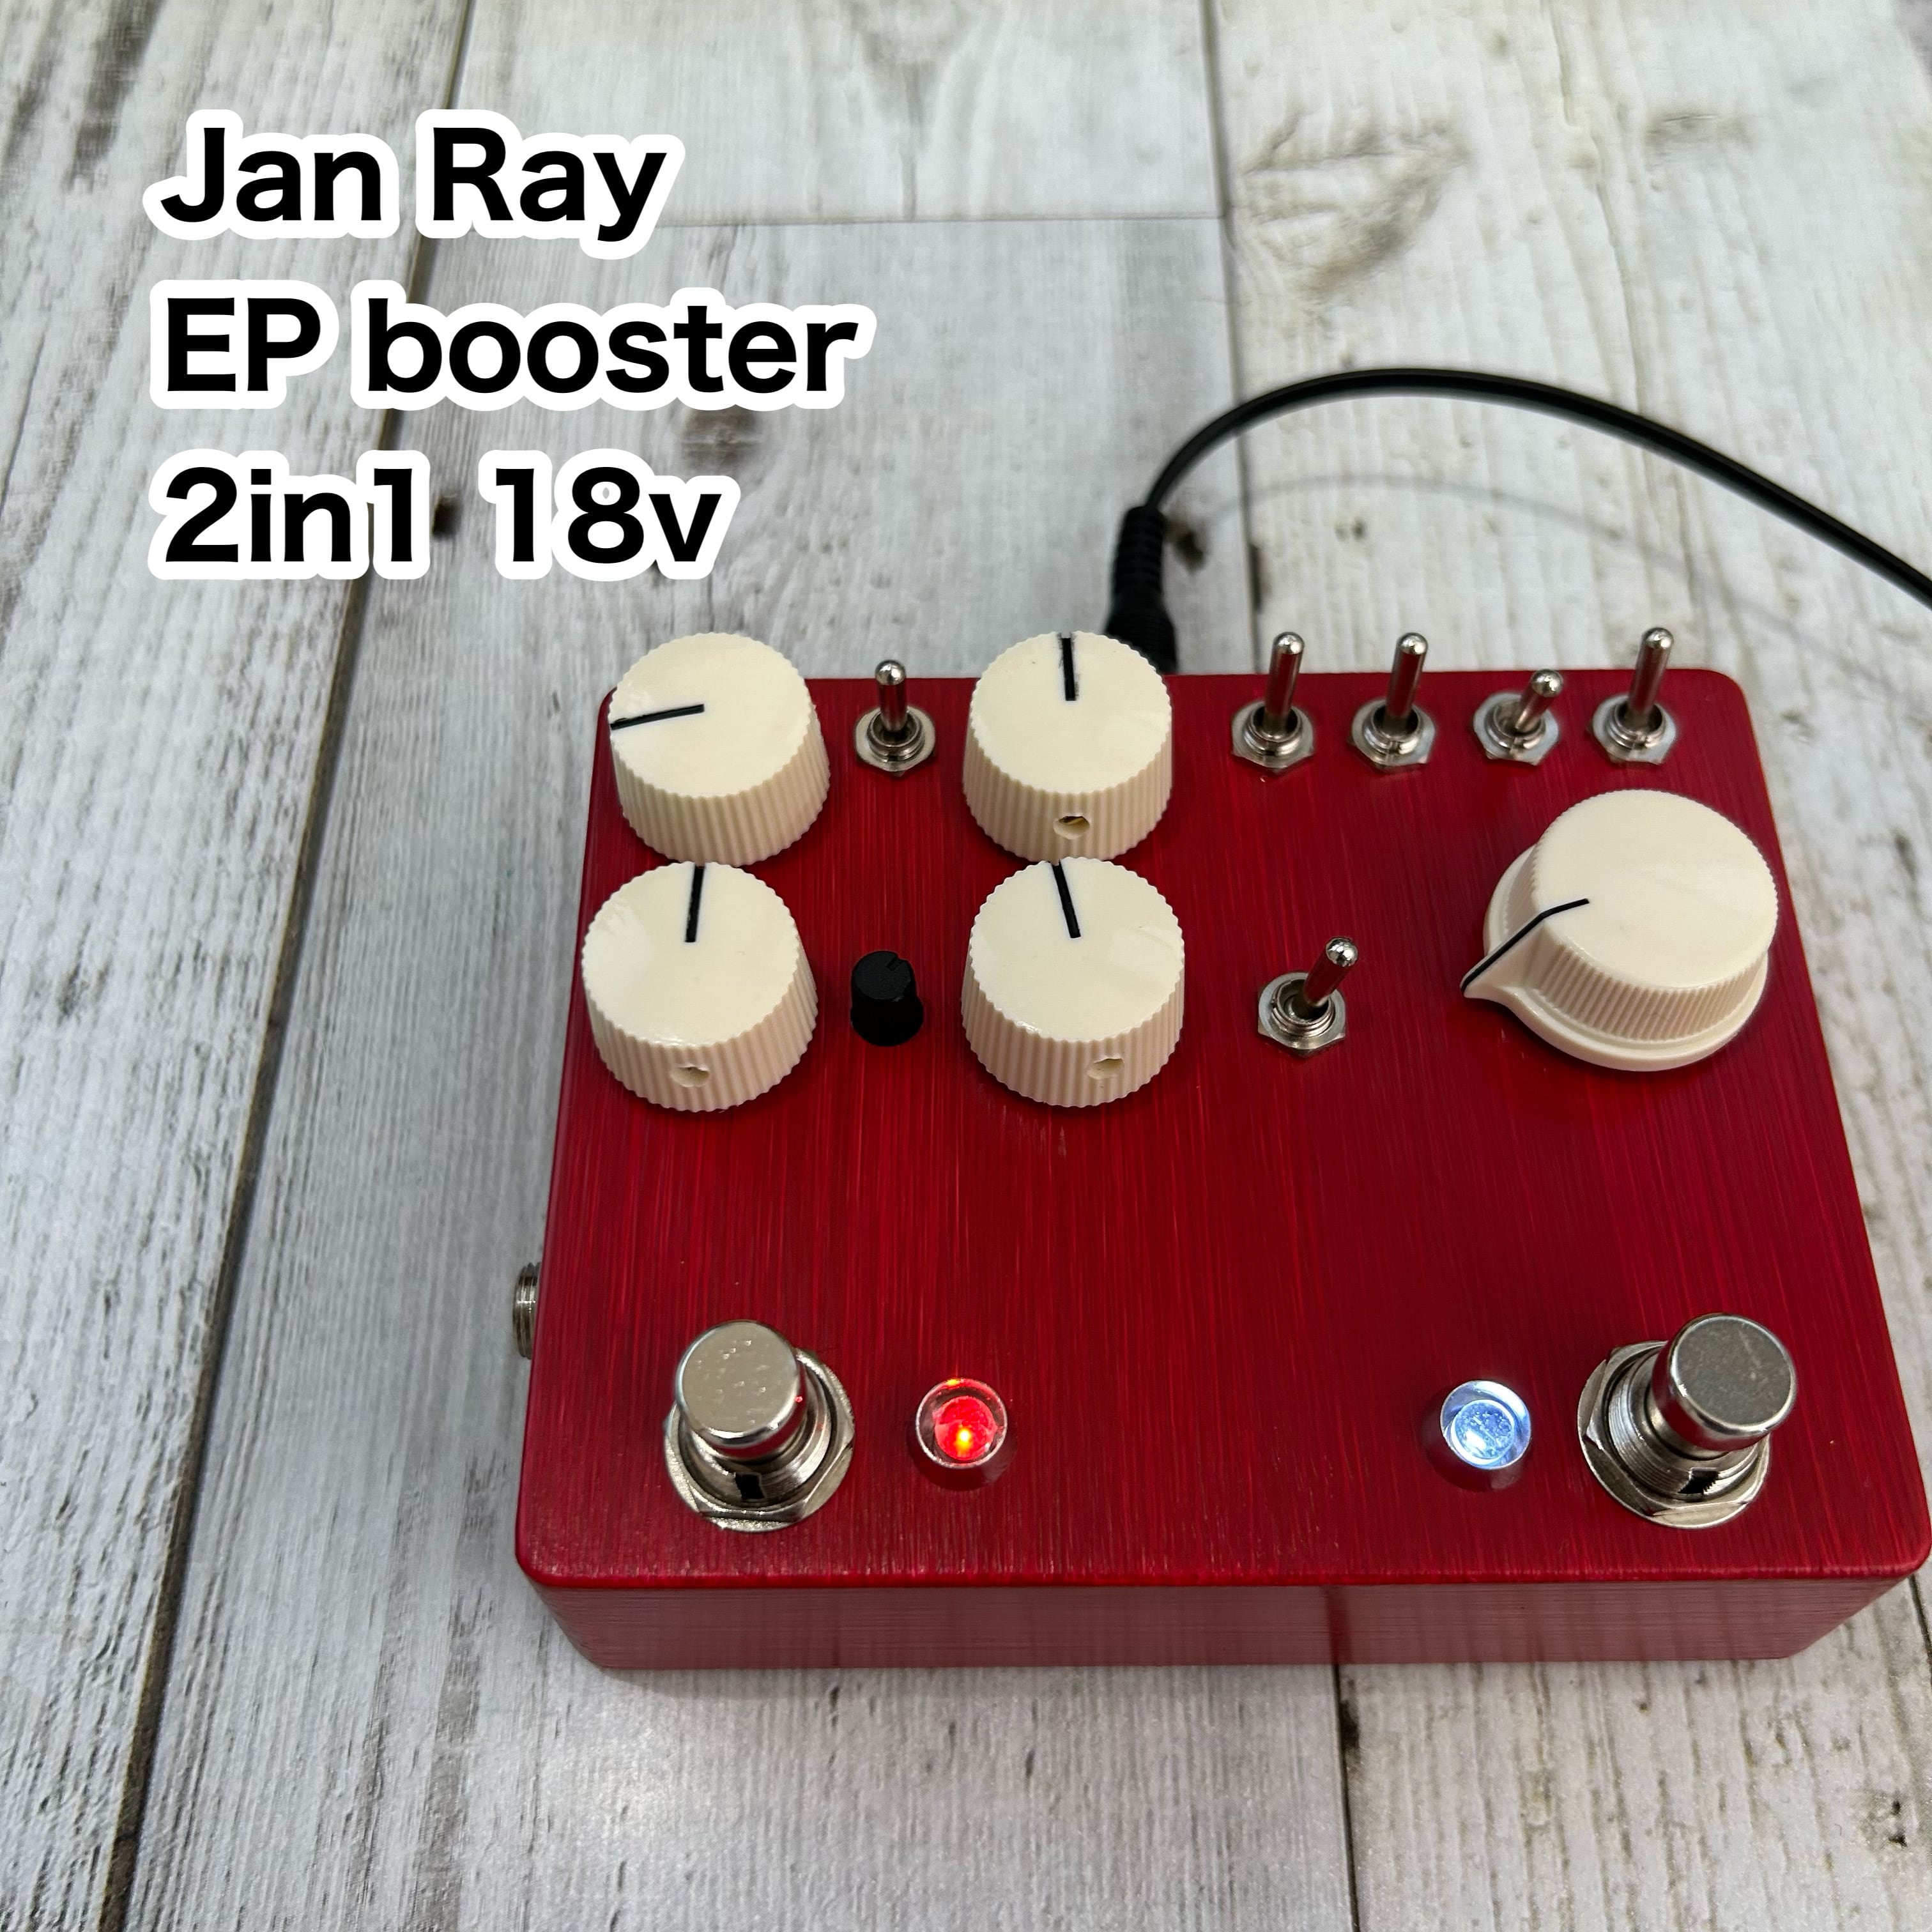 Jan Ray + EP booster 2in1 18v-